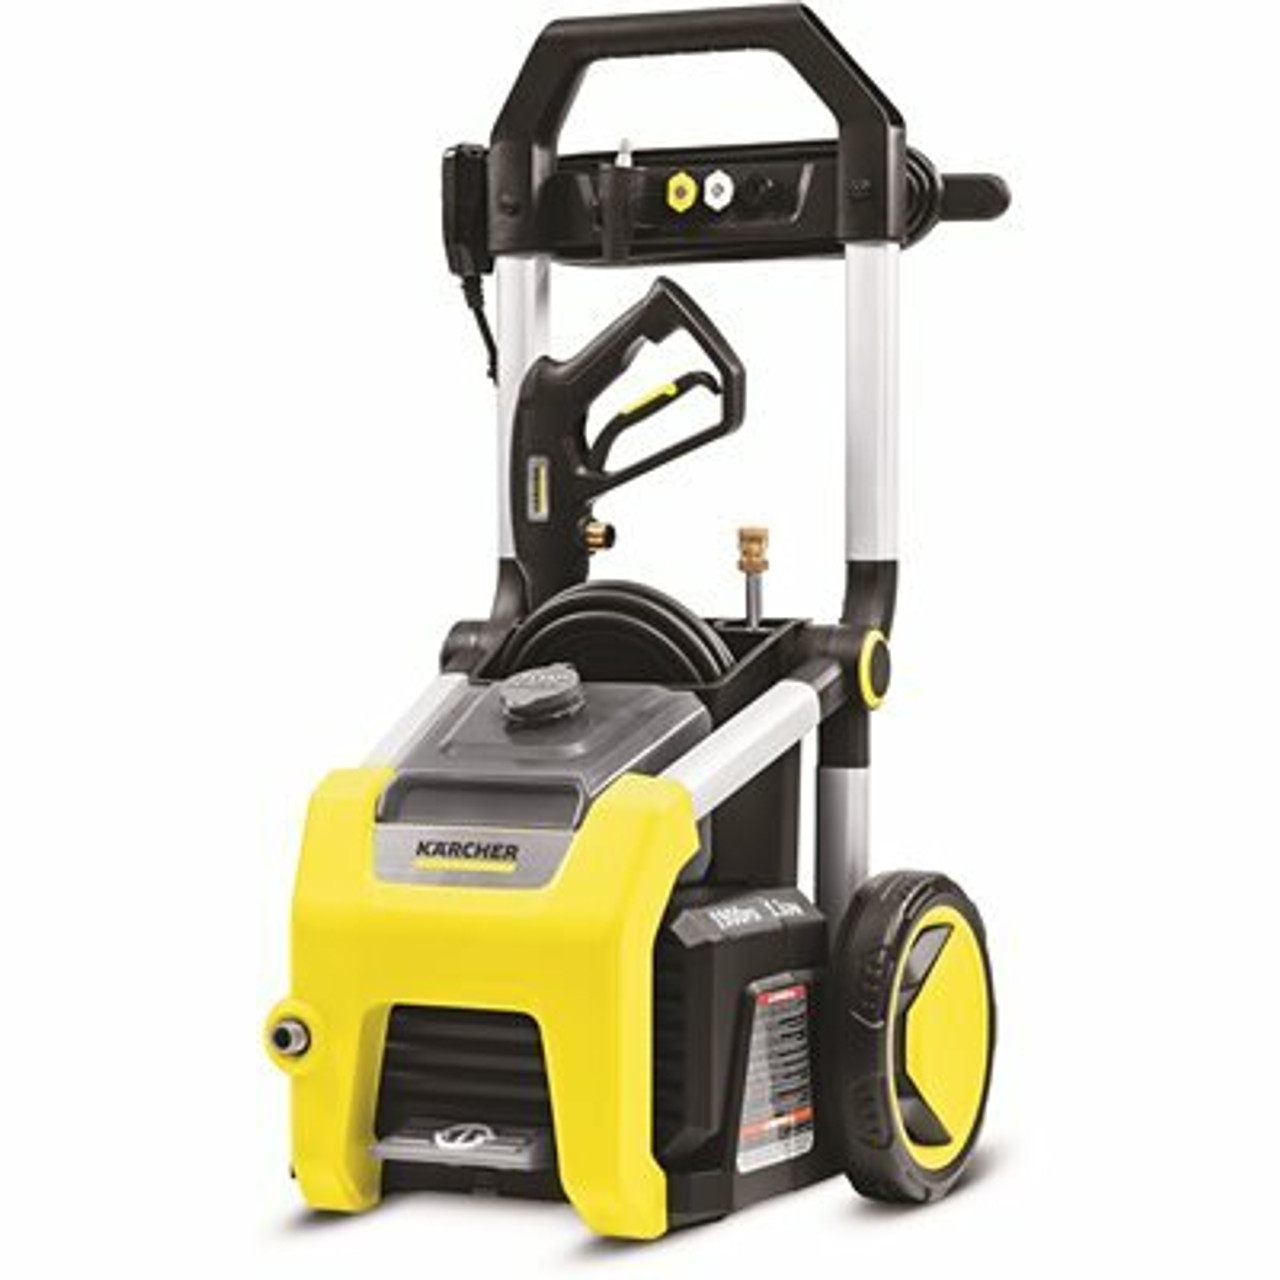 Karcher K1900 - 1900 Psi 1.3 Gpm Electric Pressure Washer With Wheels Folding Handle 1G Detergent Tank - Anthracite/Black